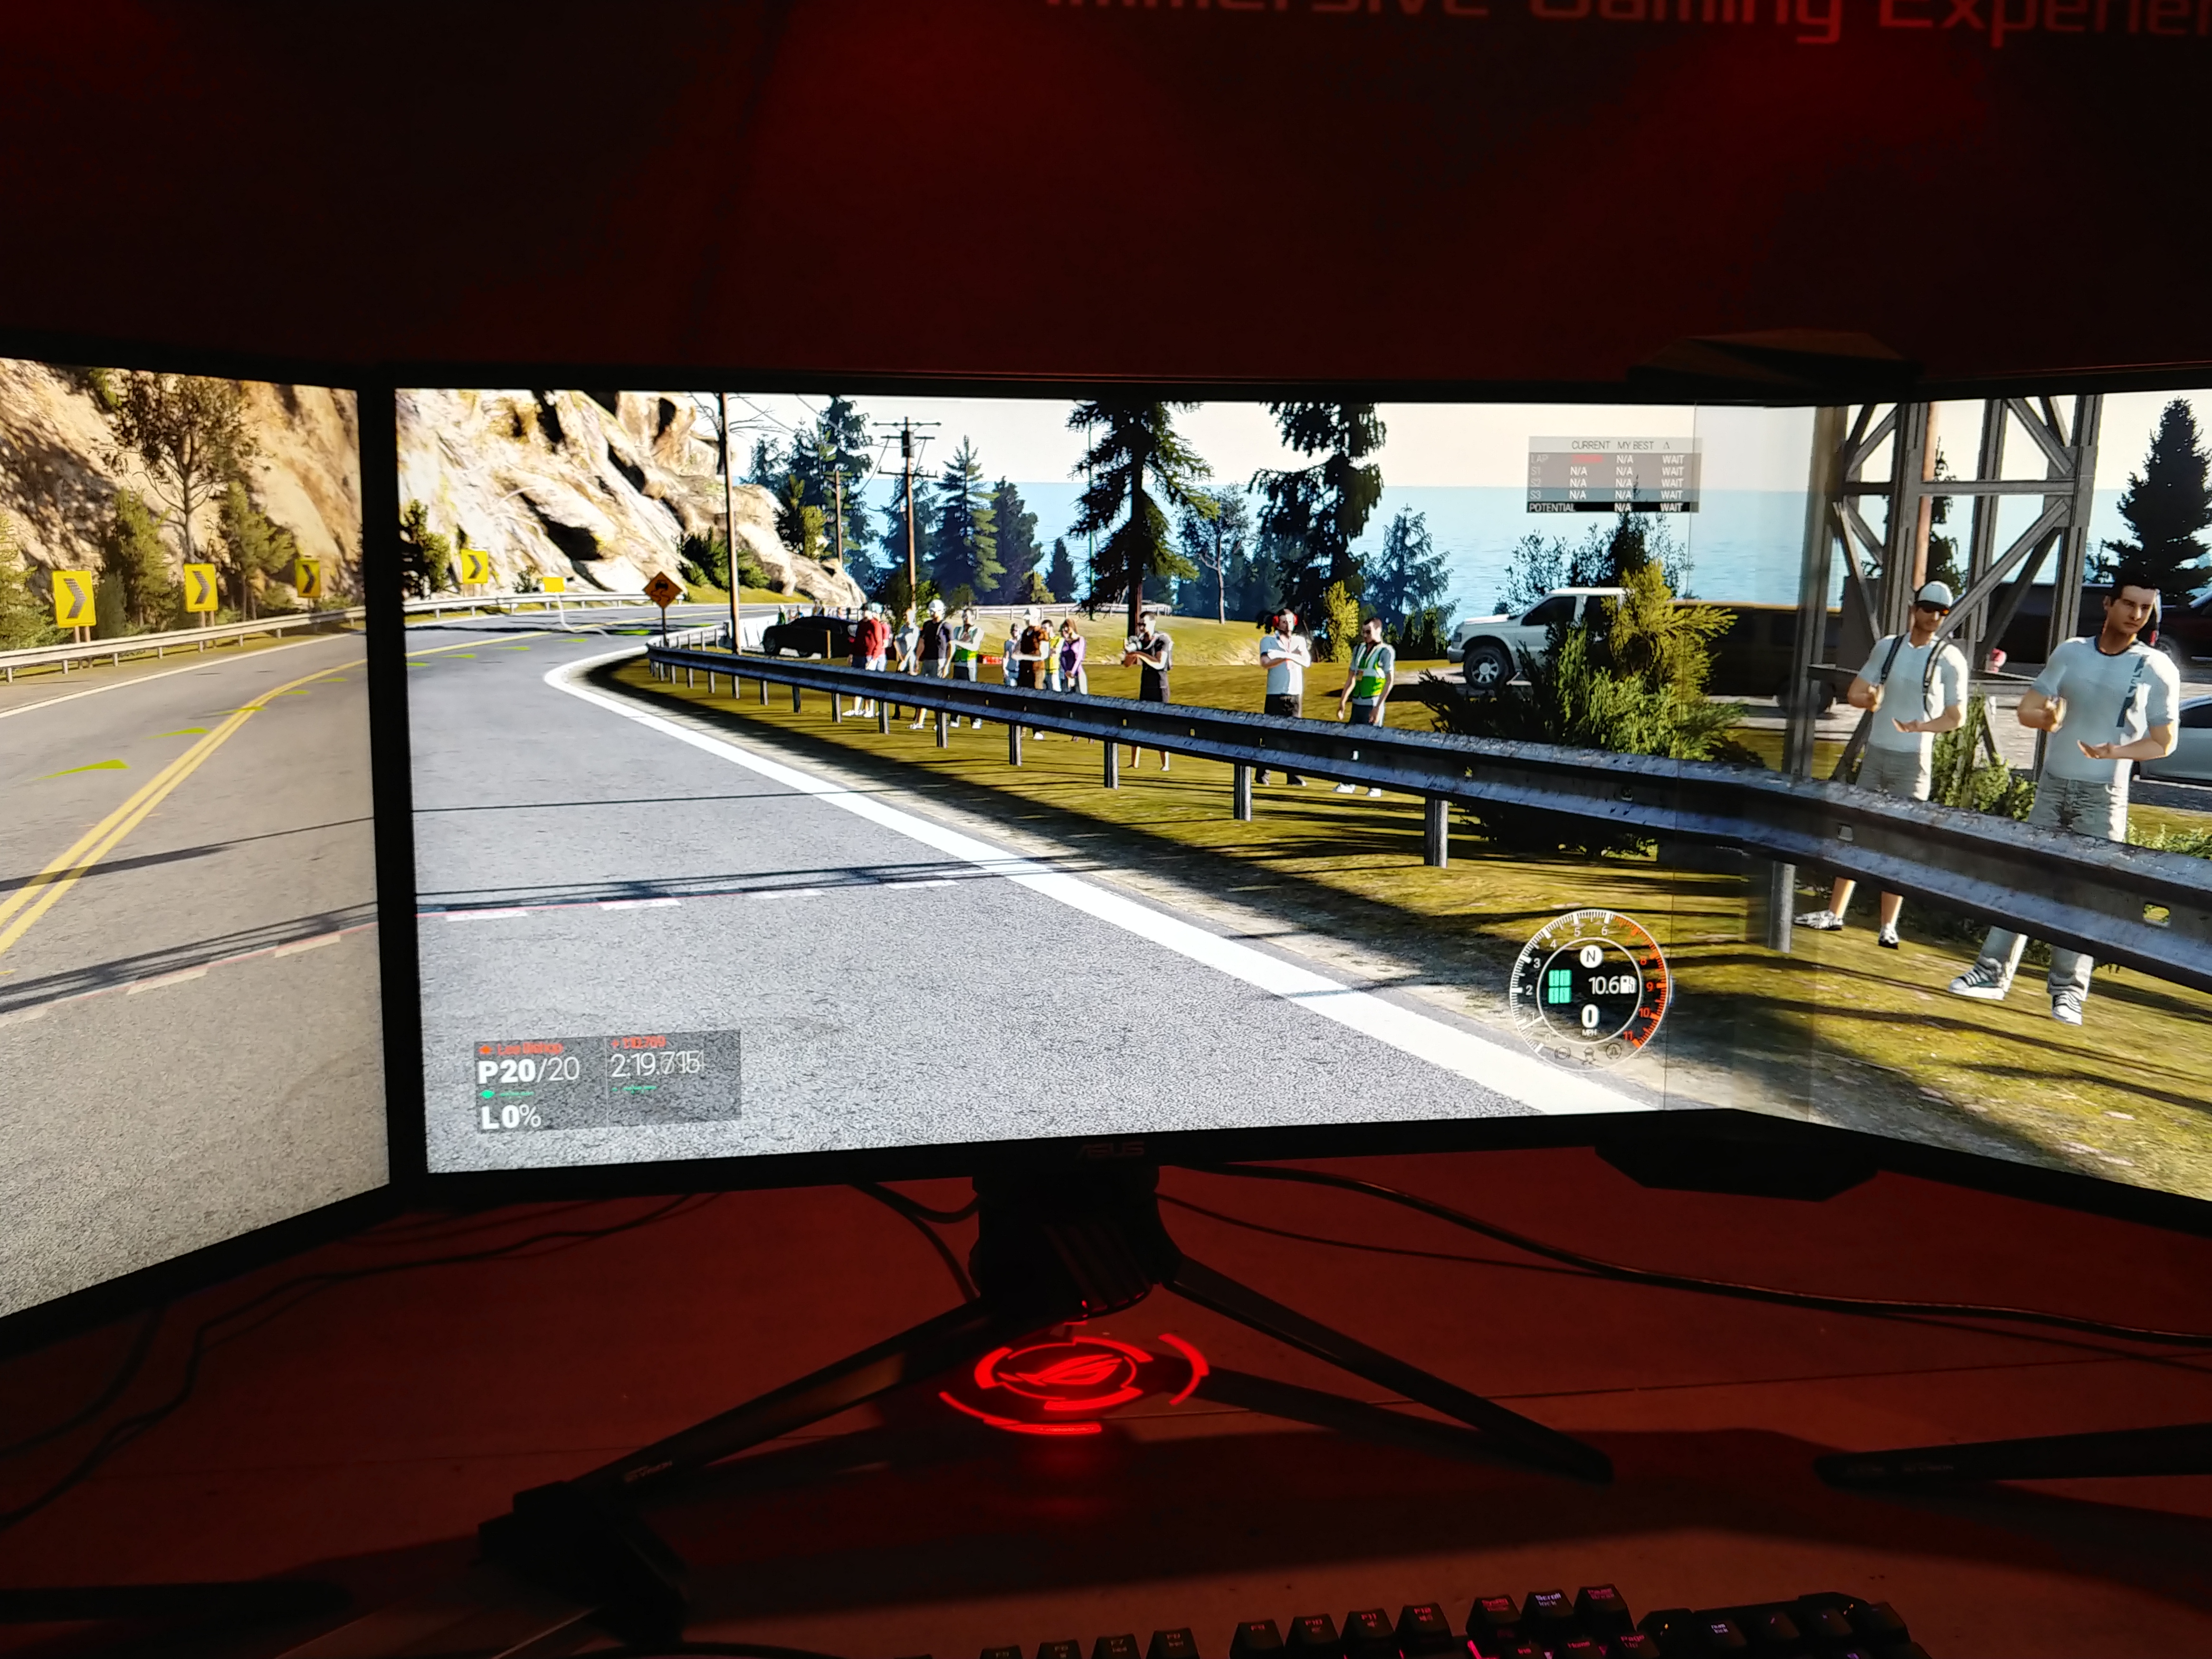 ASUS Wants to Eliminate Distracting Borders in Multi-Monitor